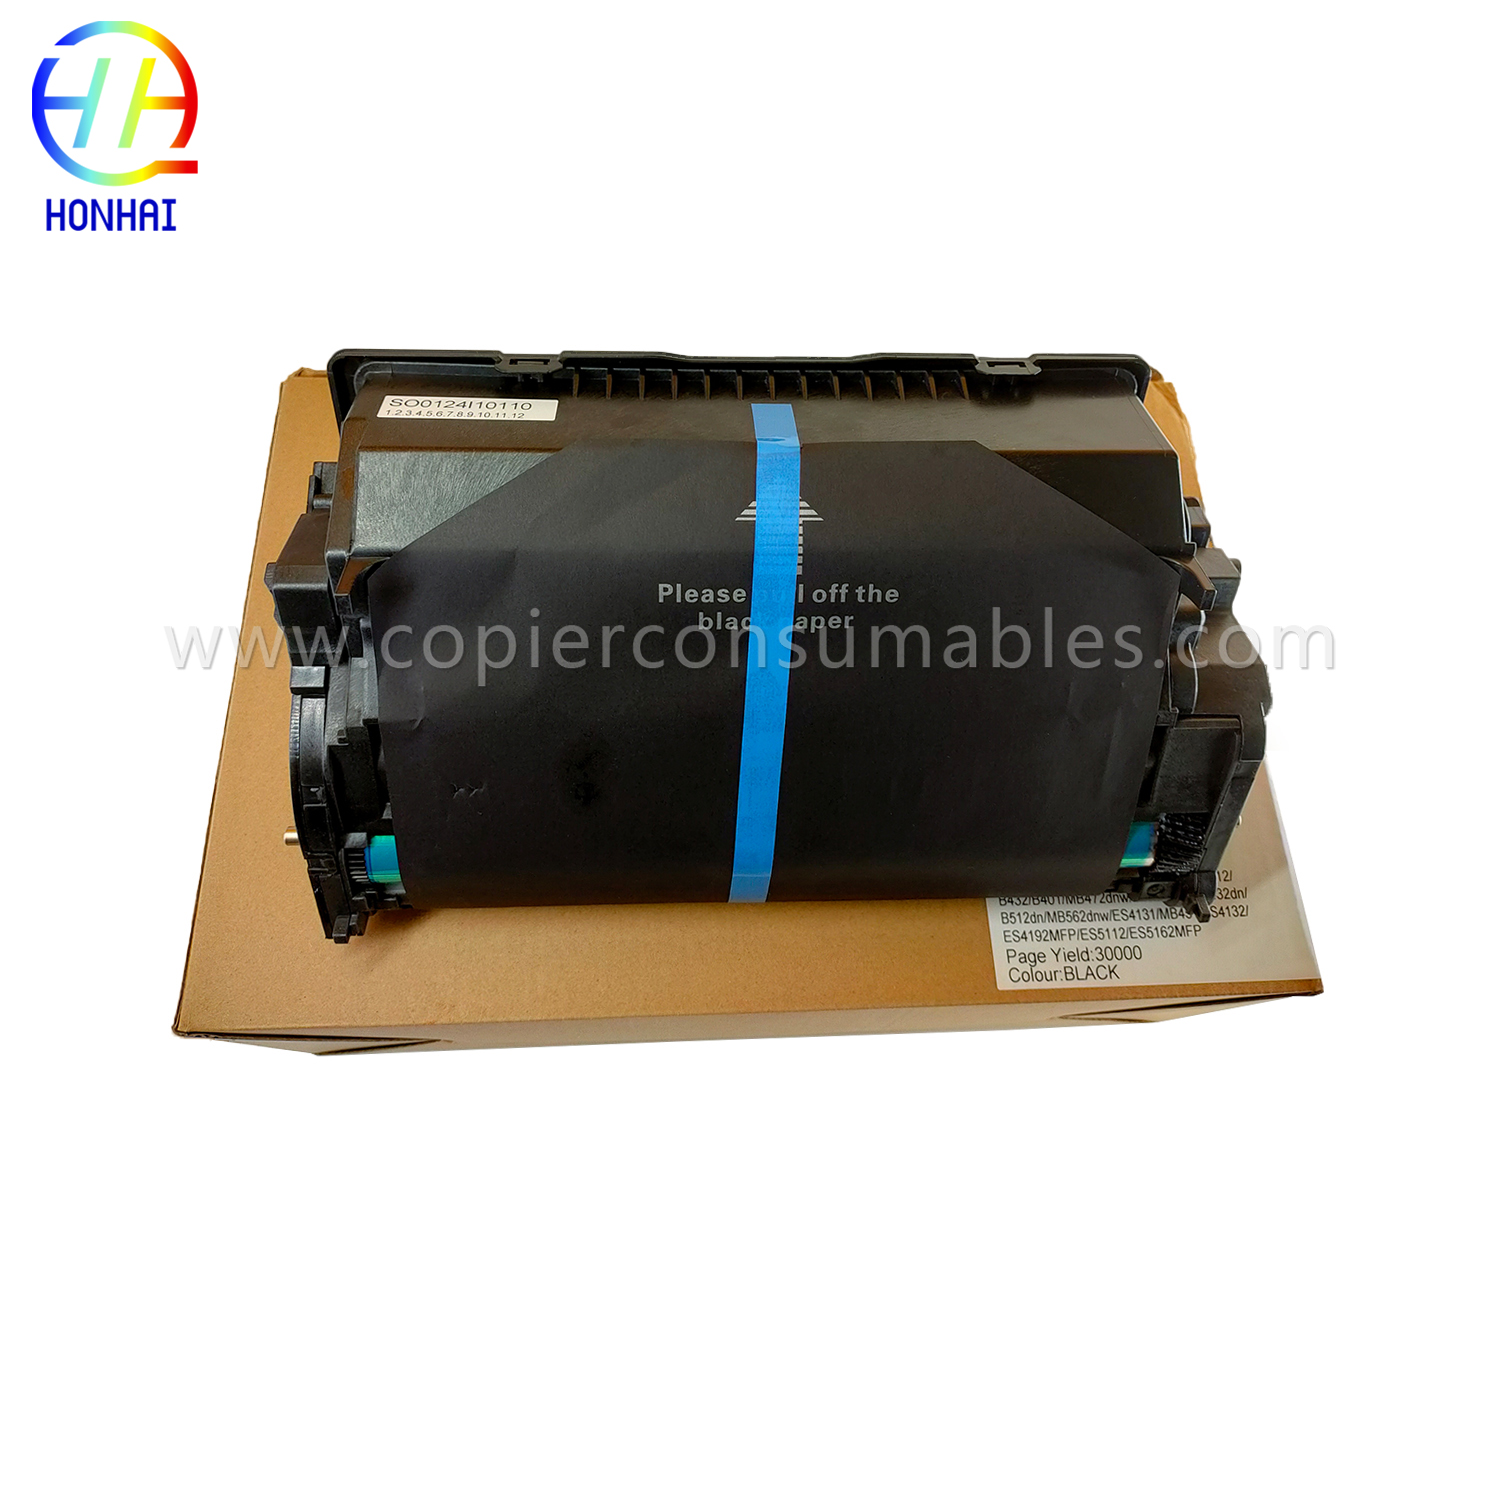 High-Performance All-in-One Printer with High-Quality Printing Capabilities